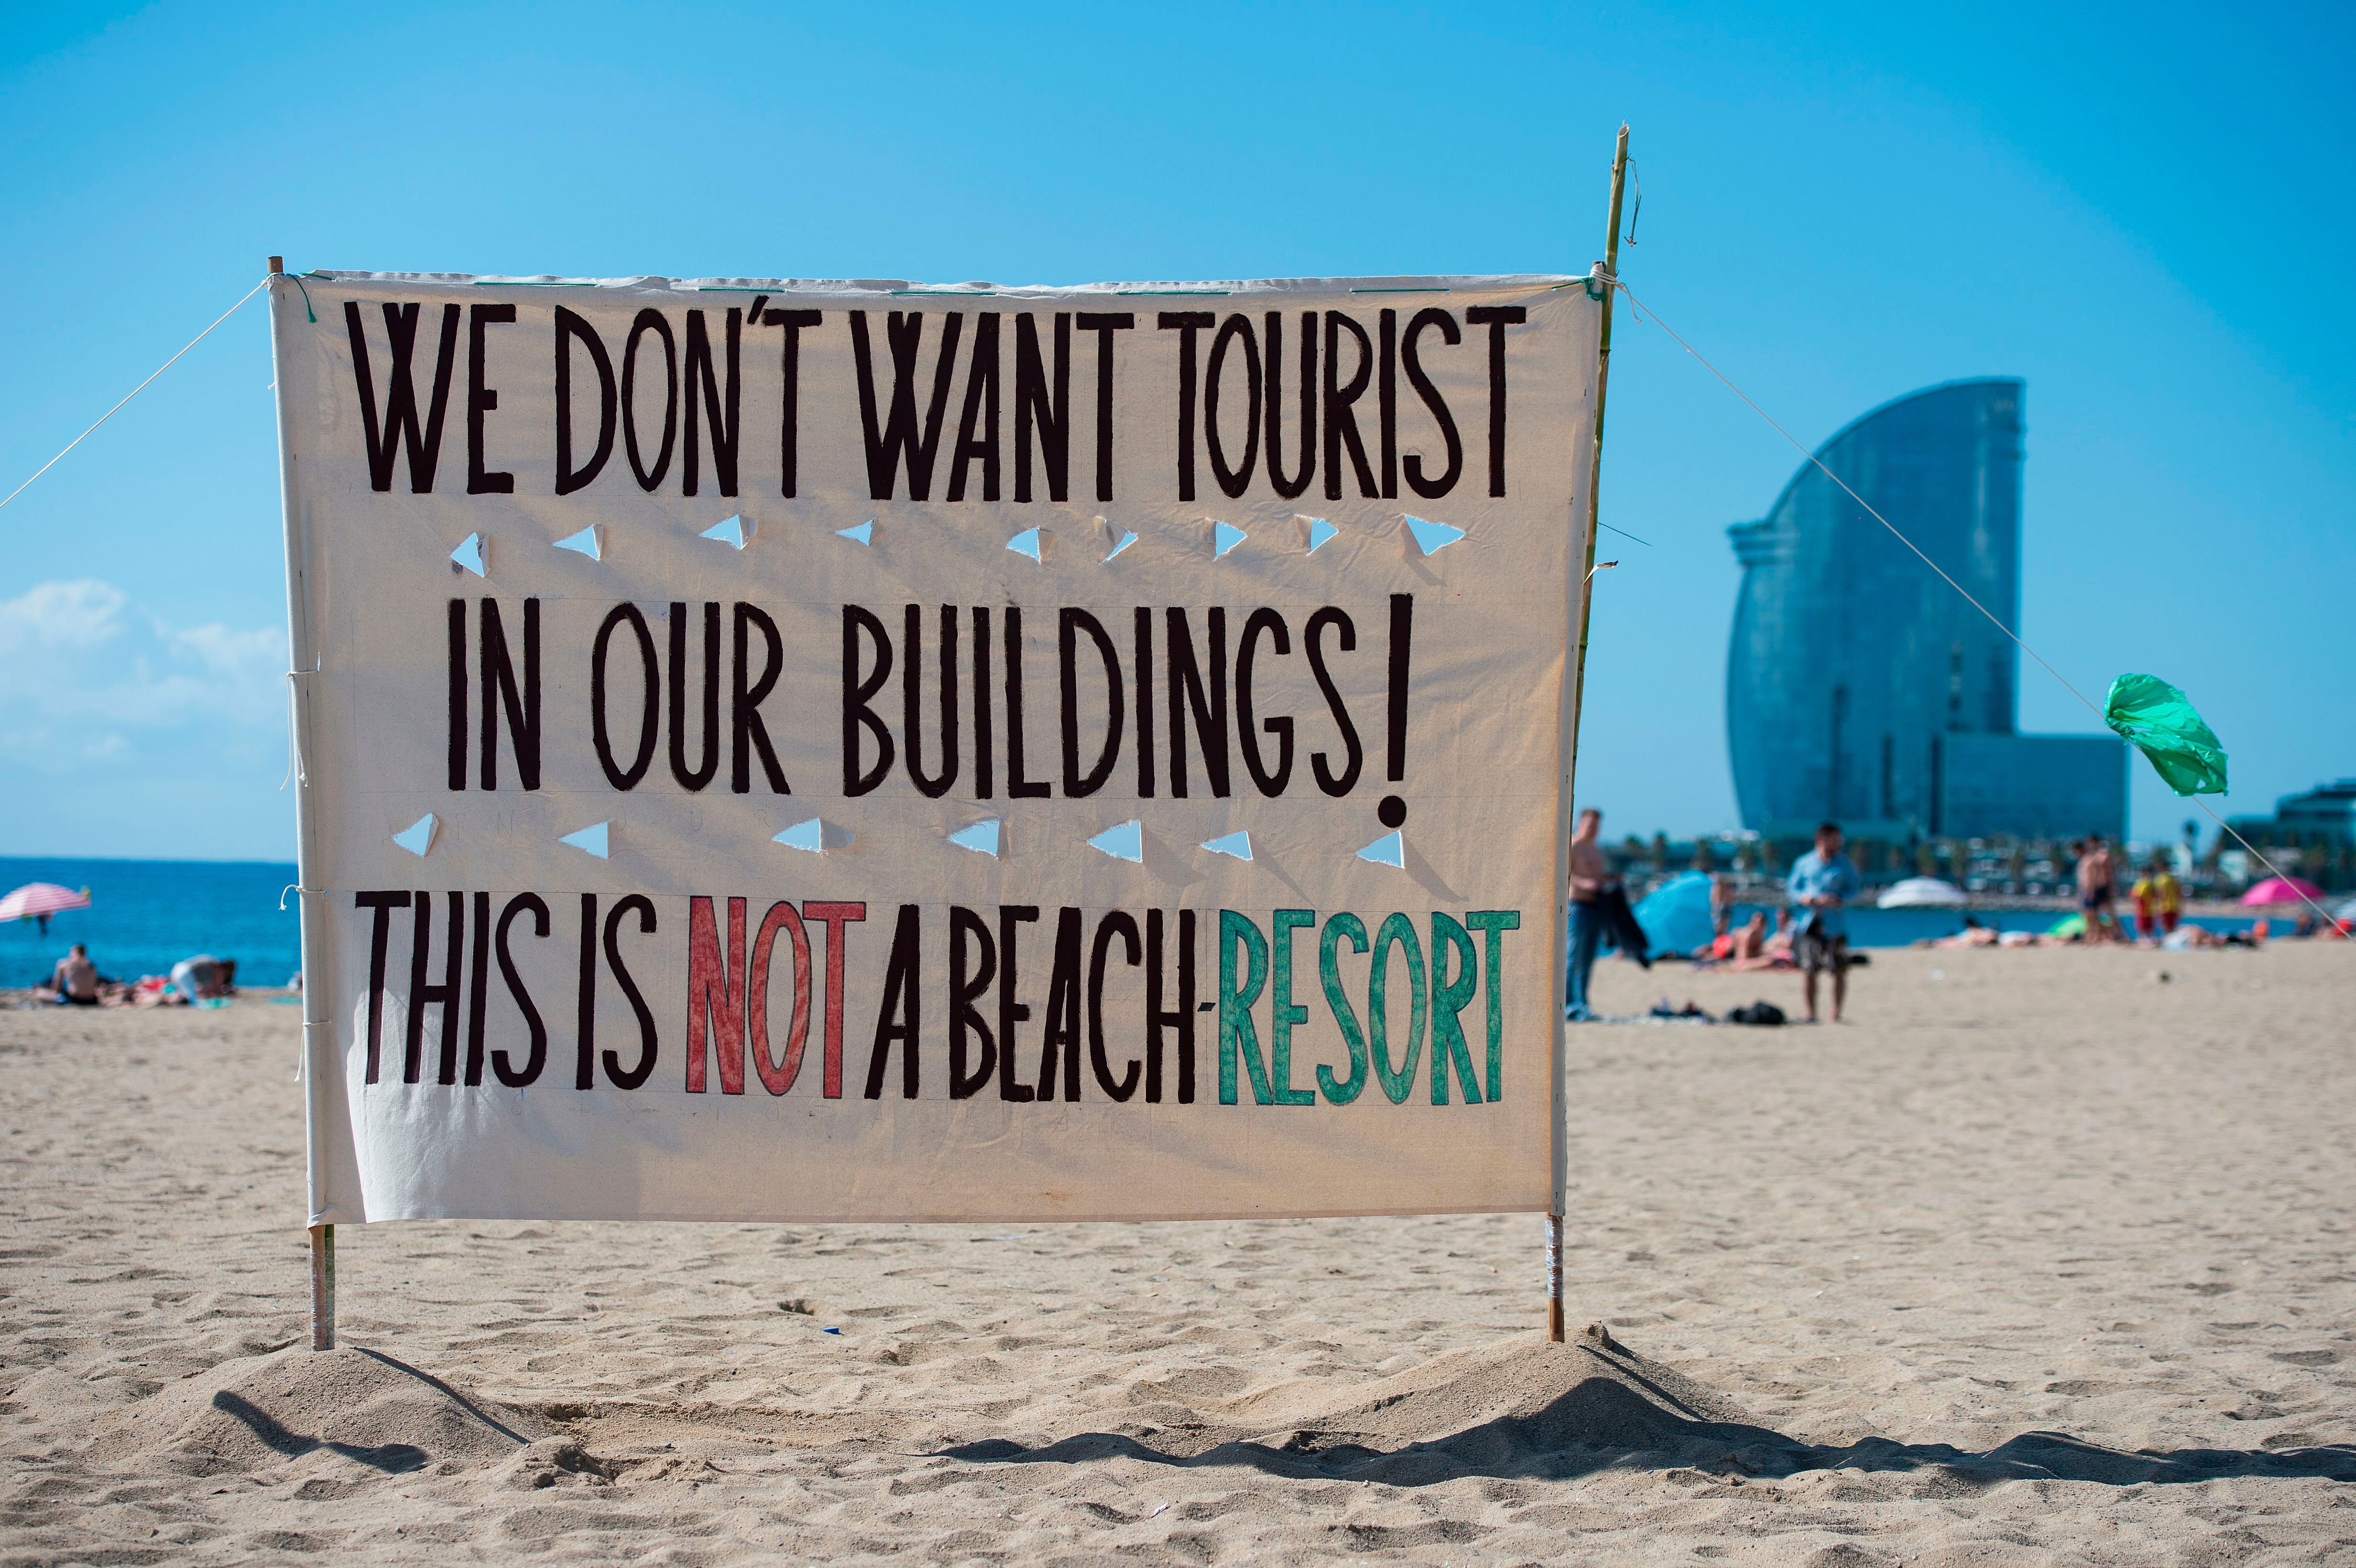 Anti-tourism banners in Barcelona